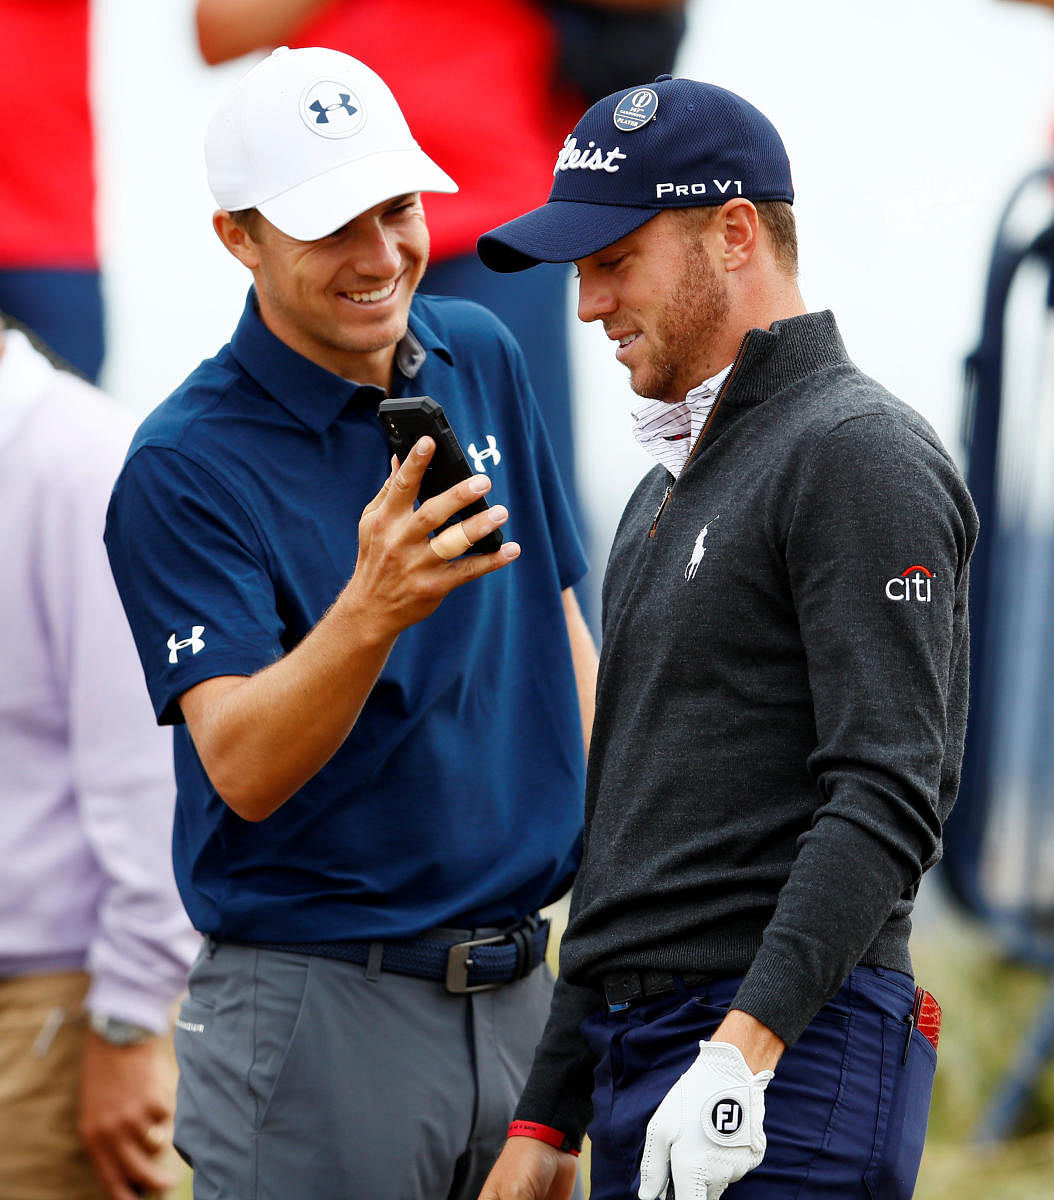 DEADLY DUO: Defending champion Jordan Spieth (left) and fellow American Justin Thomas are amongst the favourites to land the spoils. REUTERS